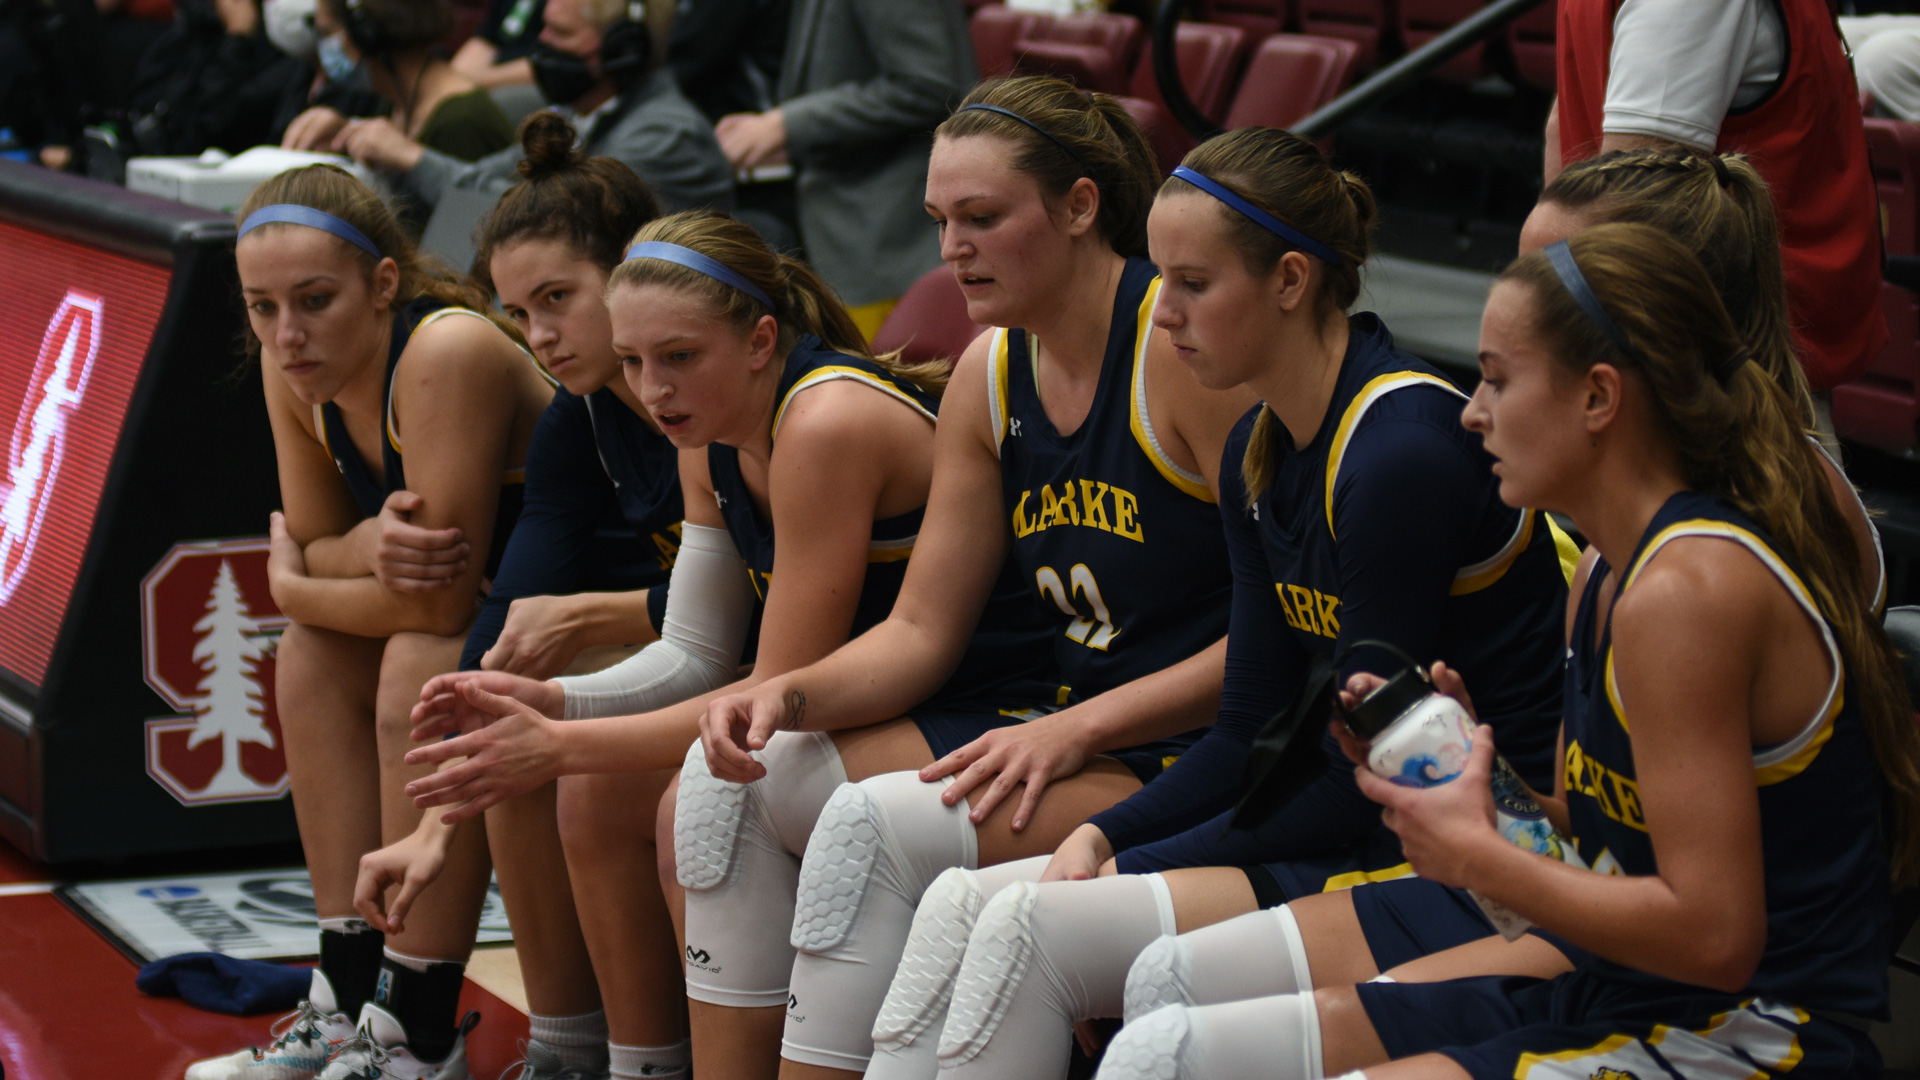 Clarke women's basketball players on the bench during a timeout